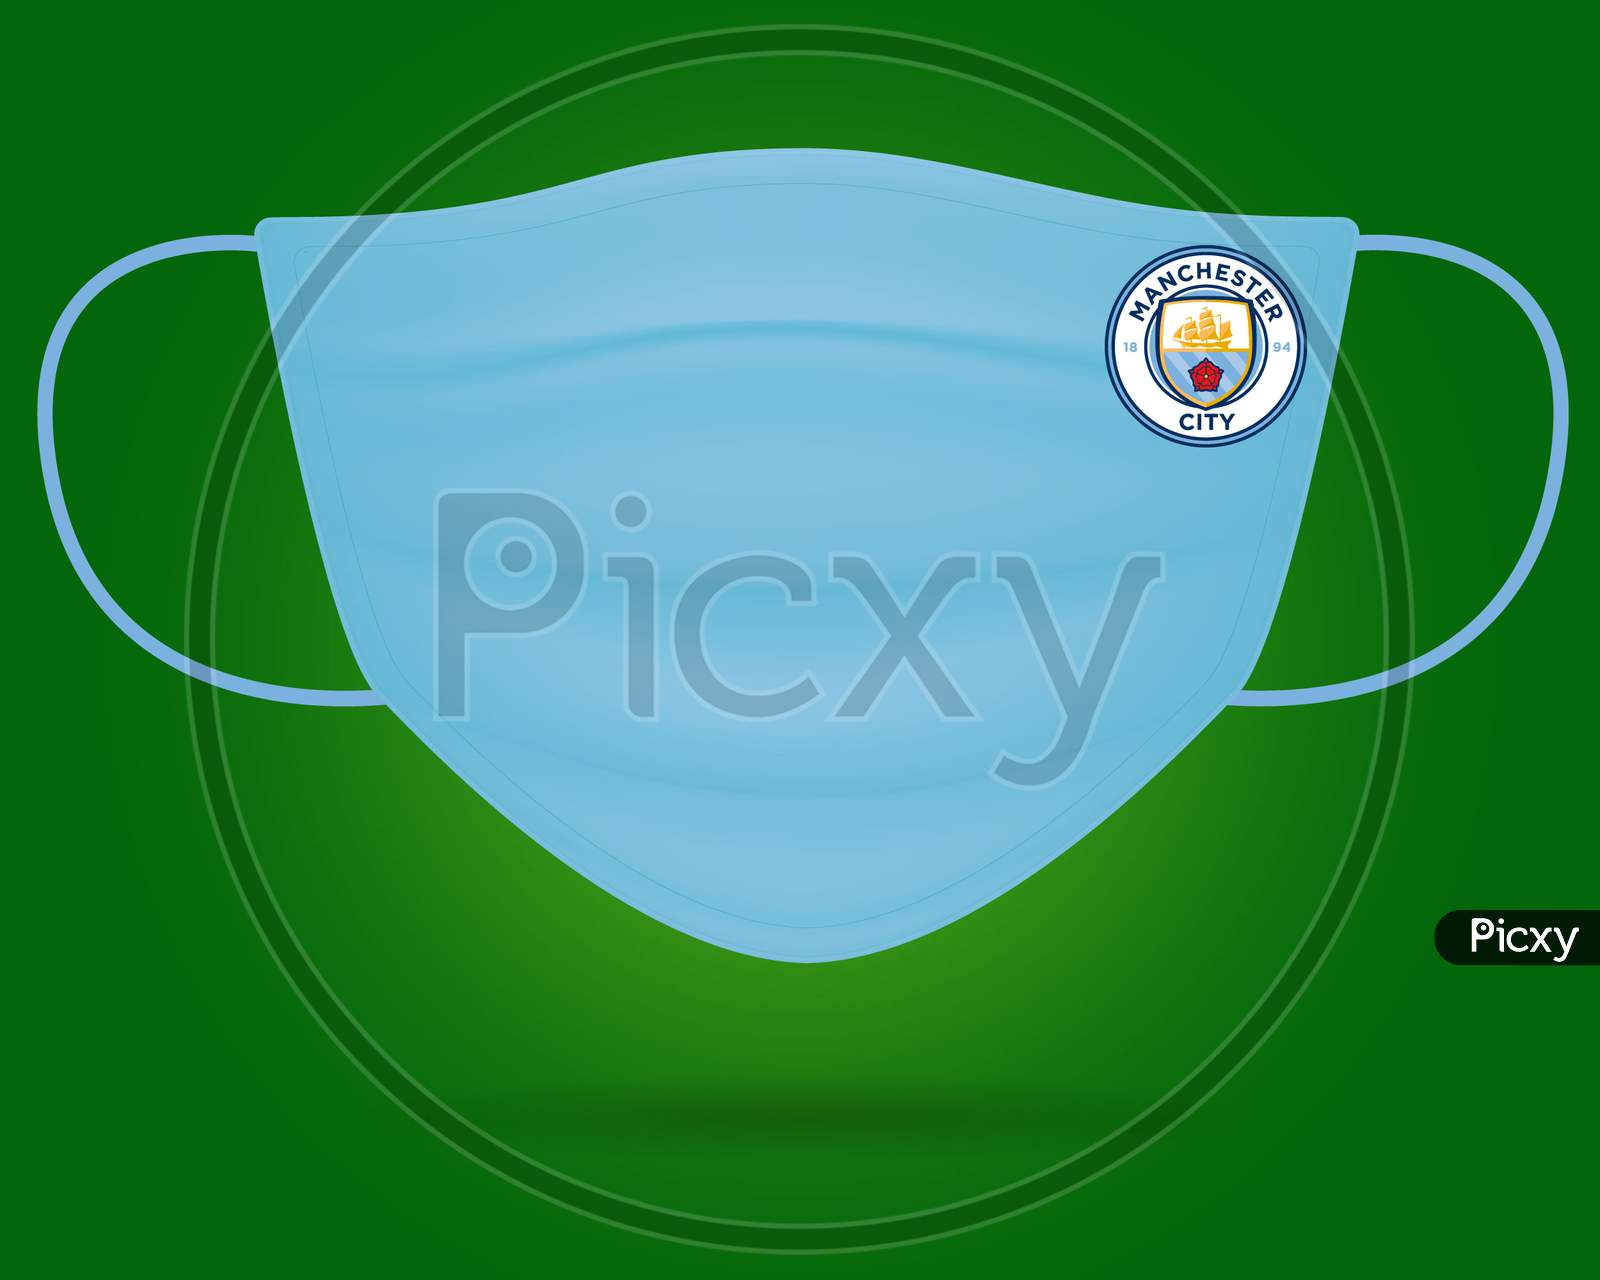 Surgical Face Mask With Manchester City Football Club Logo In Covid-19, Wear Mask & Stay Safe, New Normal- Corona Virus Pandemic.